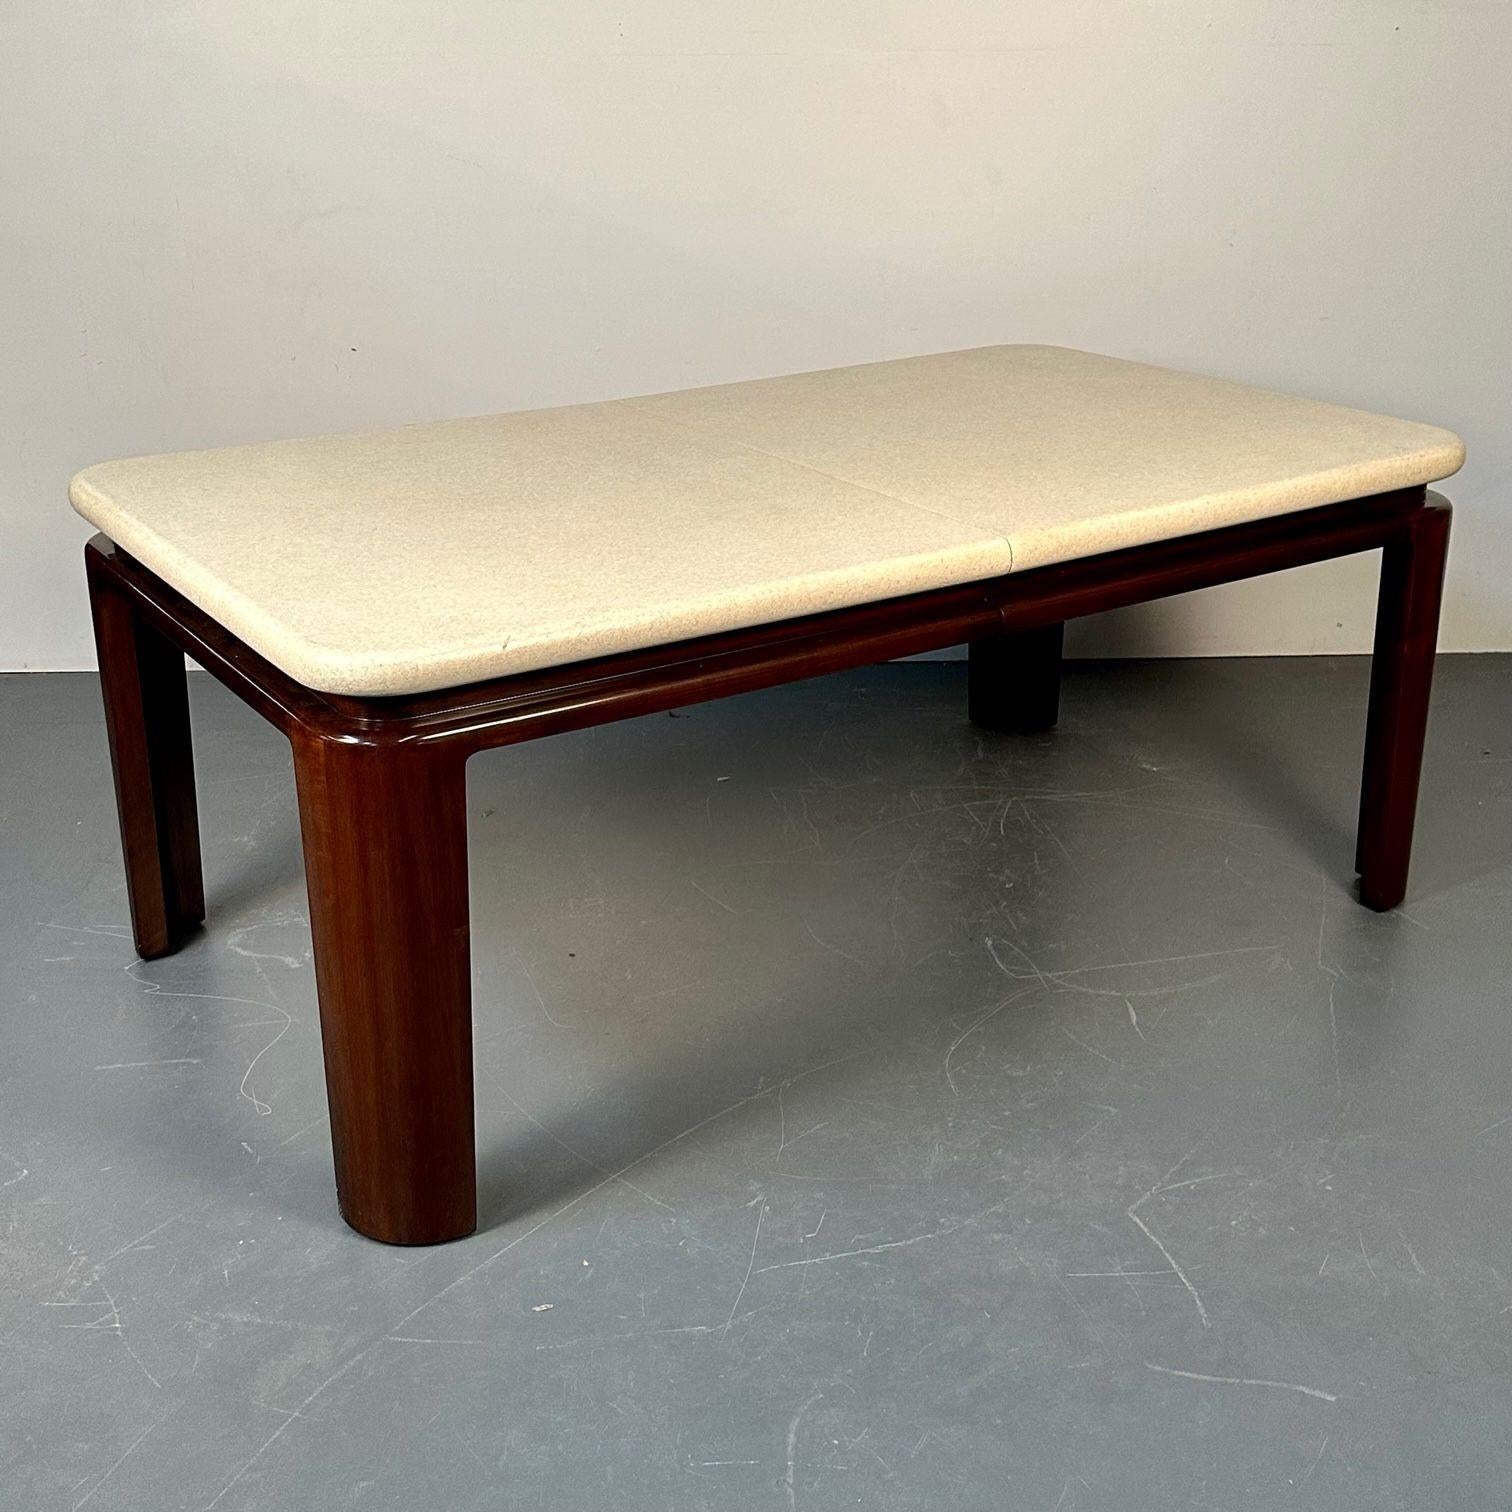 20th Century Paul Frankl, Johnson Furniture, Mid-Century Modern Dining Table, Cork, Mahogany For Sale